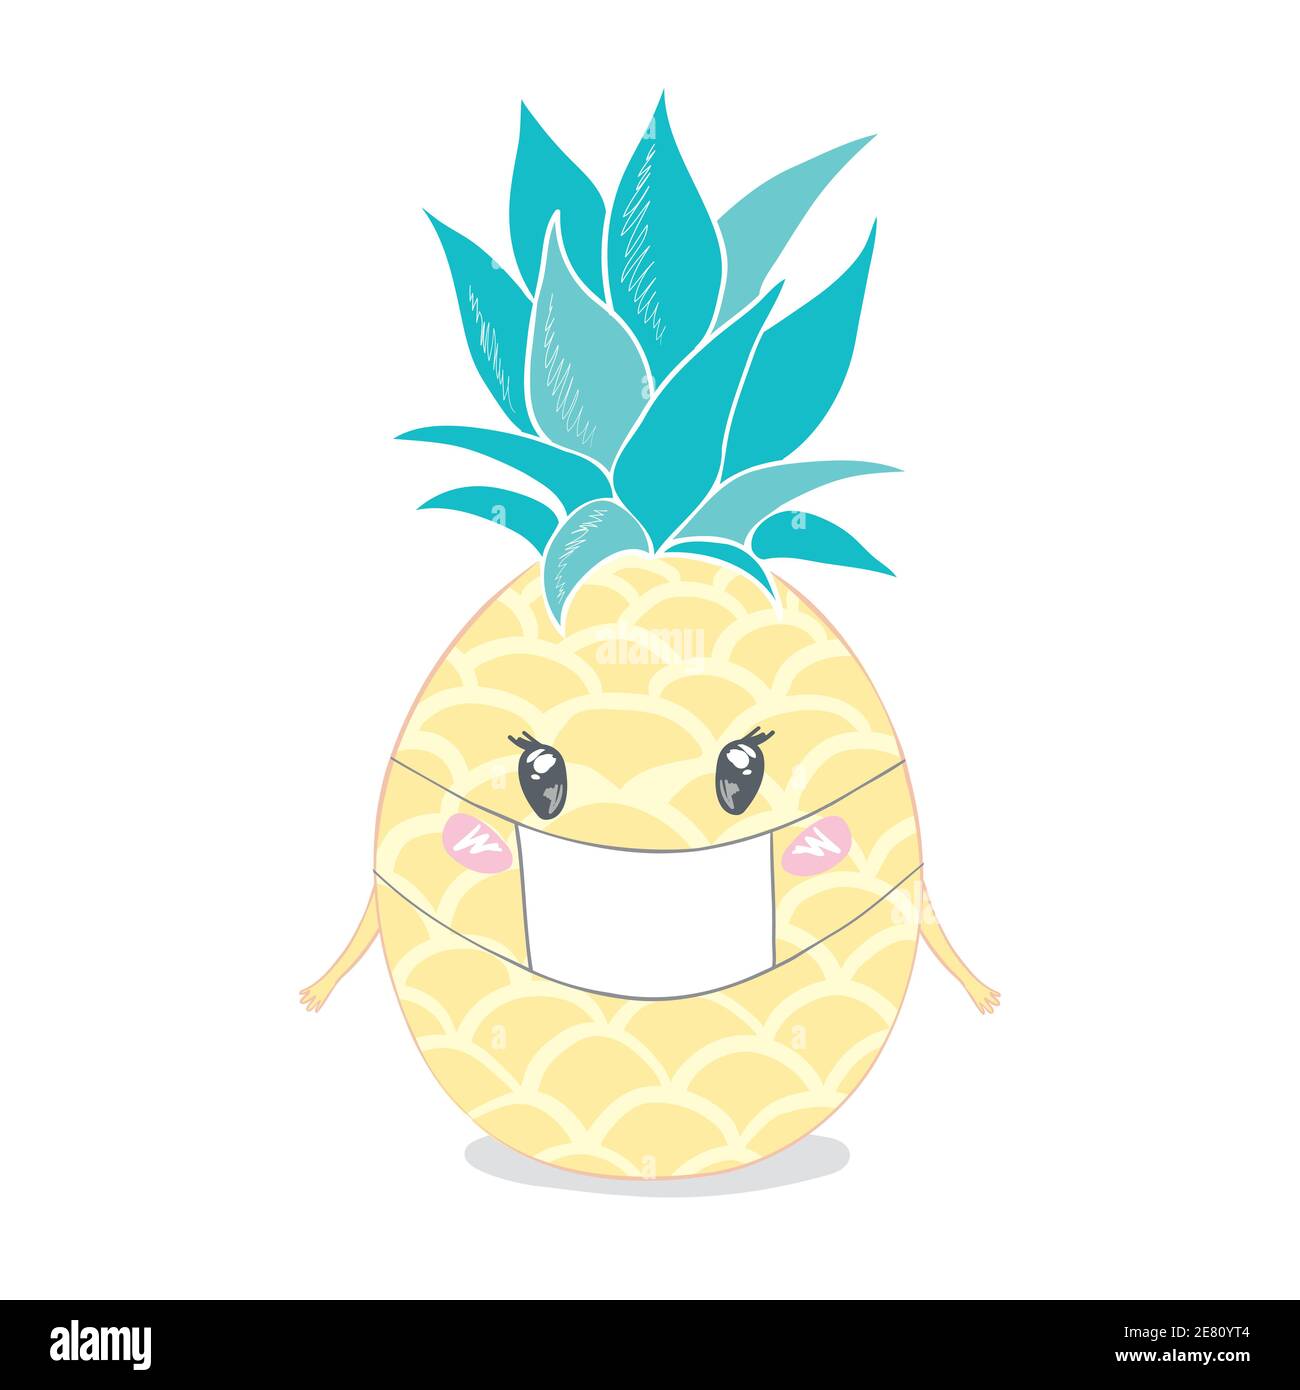 Pineapple wearing a health mask, exotic, background, food, fruit, illustration nature pineapple summer tropical vector drawing fresh Stock Vector